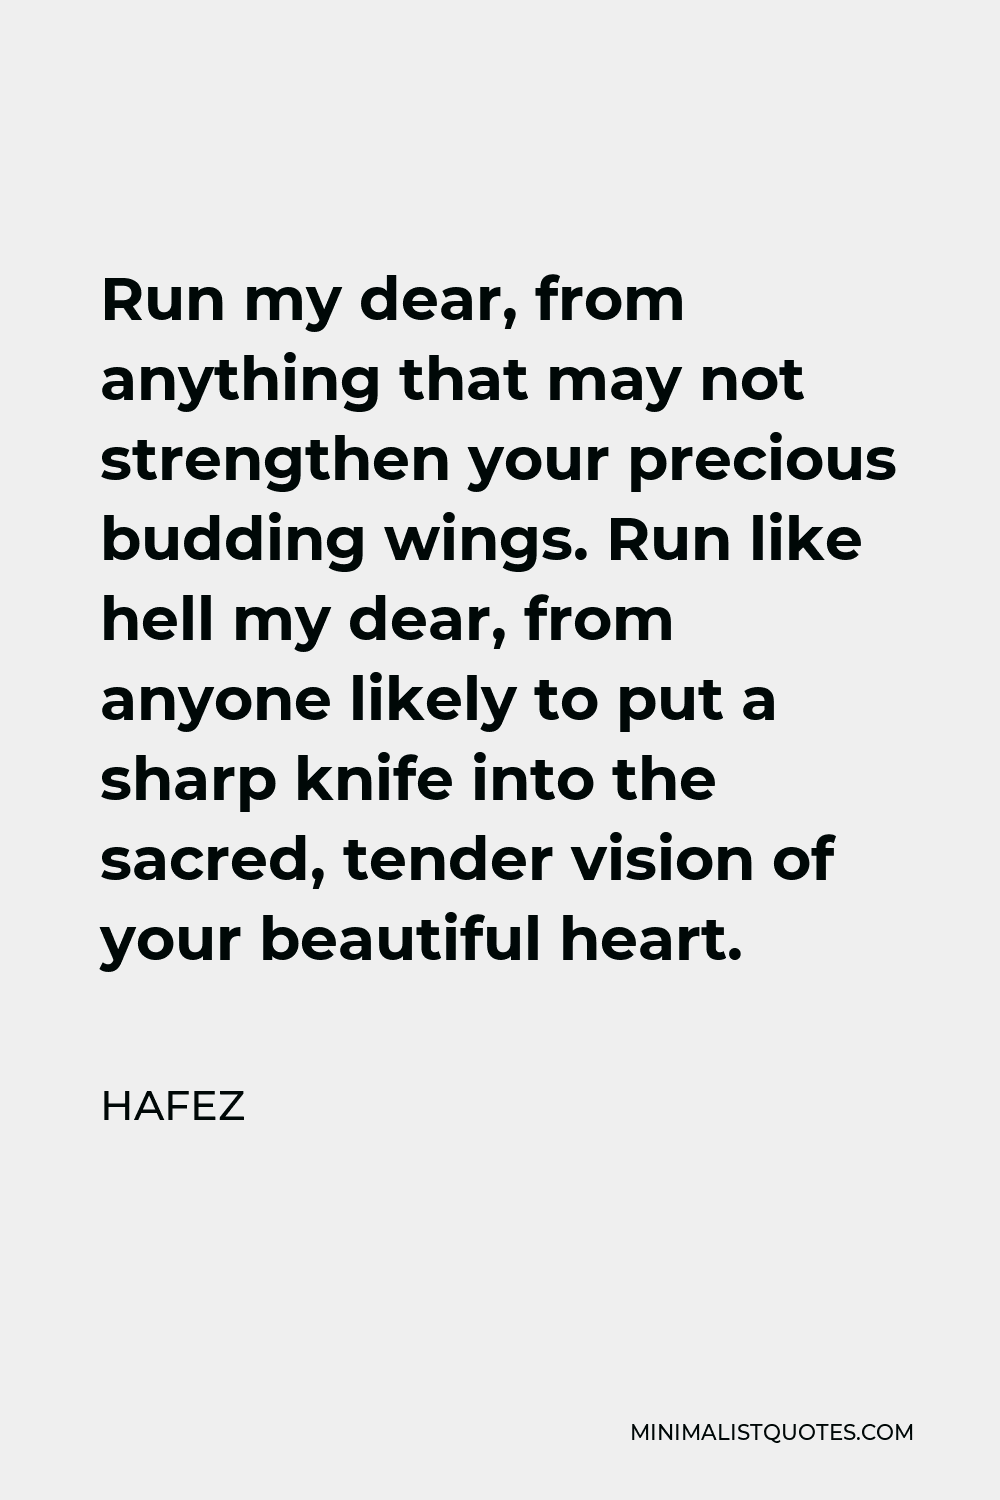 Hafez Quote - Run my dear, from anything that may not strengthen your precious budding wings. Run like hell my dear, from anyone likely to put a sharp knife into the sacred, tender vision of your beautiful heart.